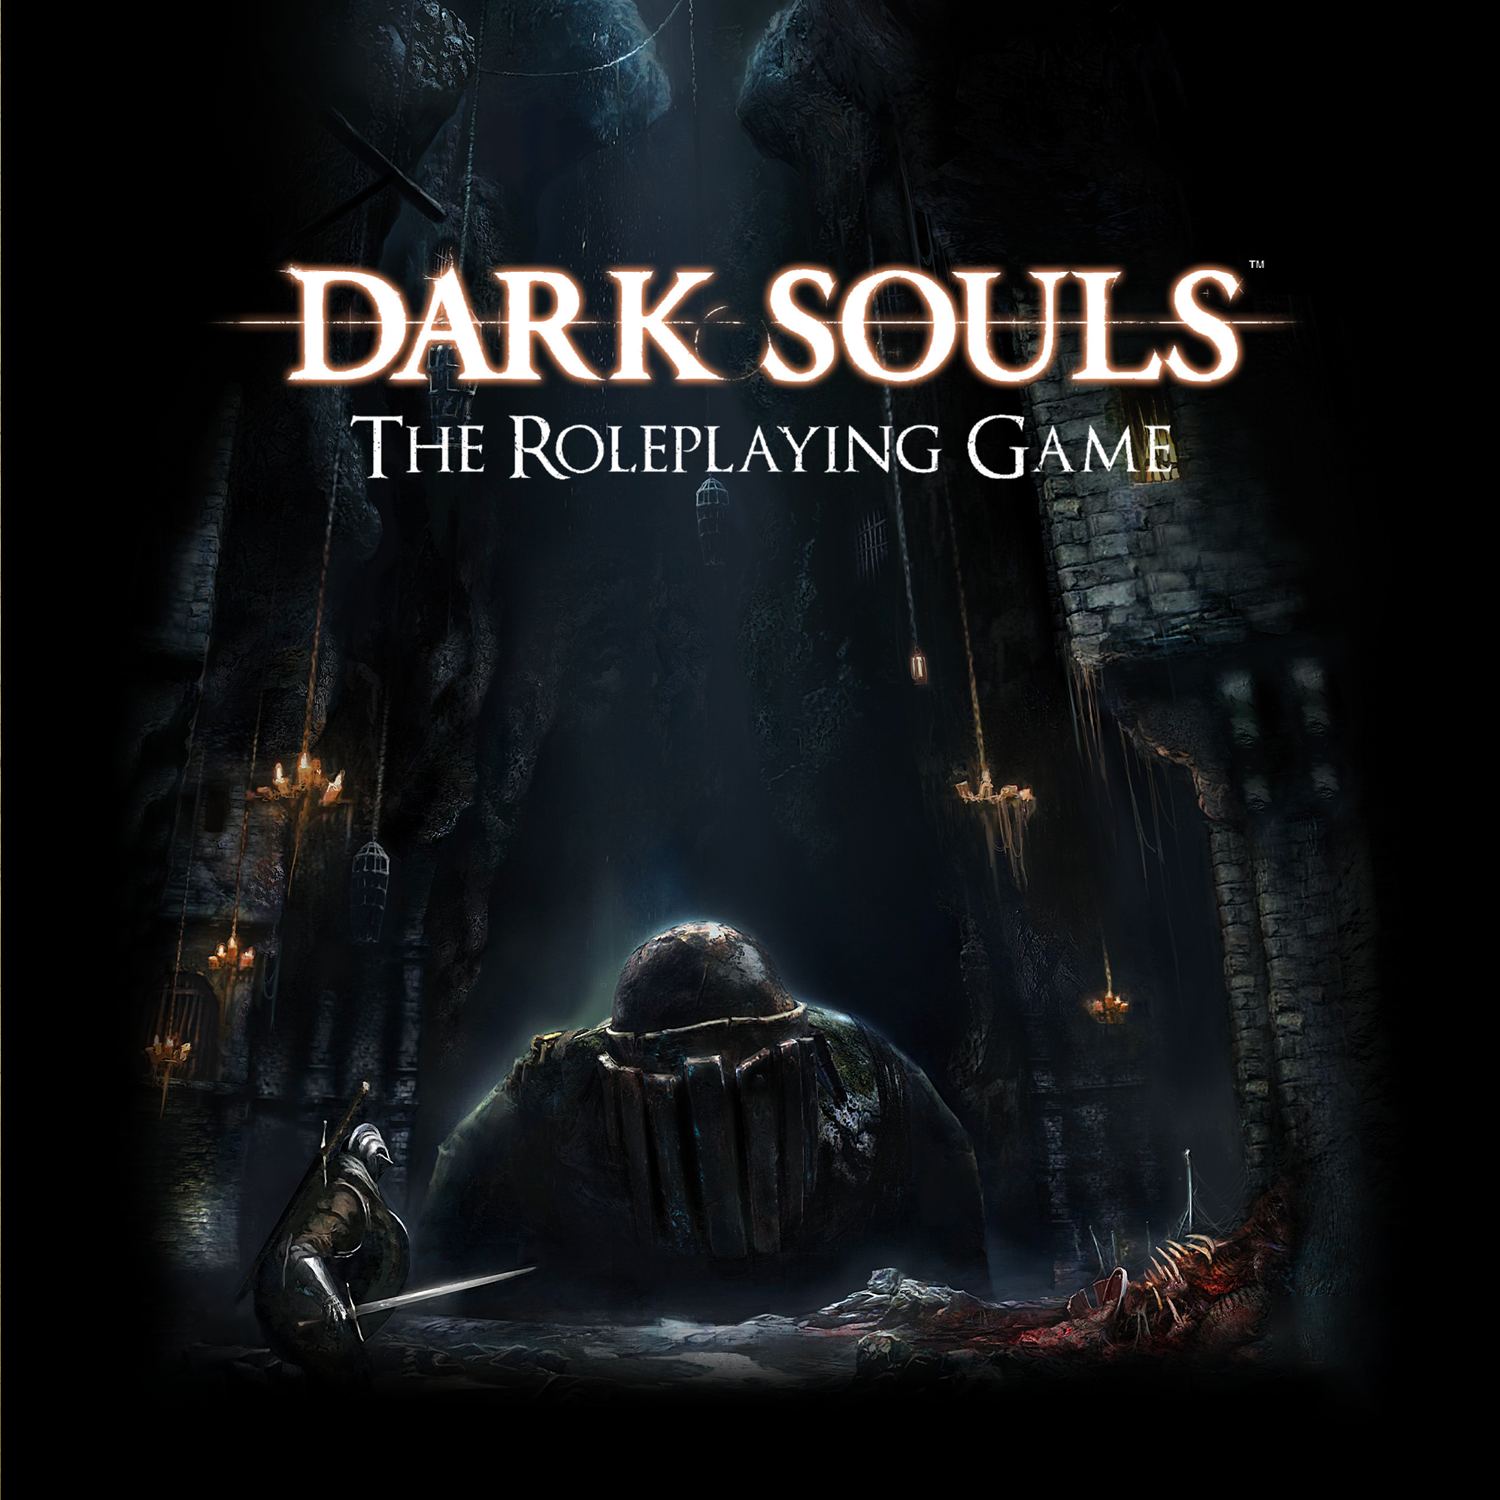 Dark Souls: The Roleplaying Game - Learn More >>